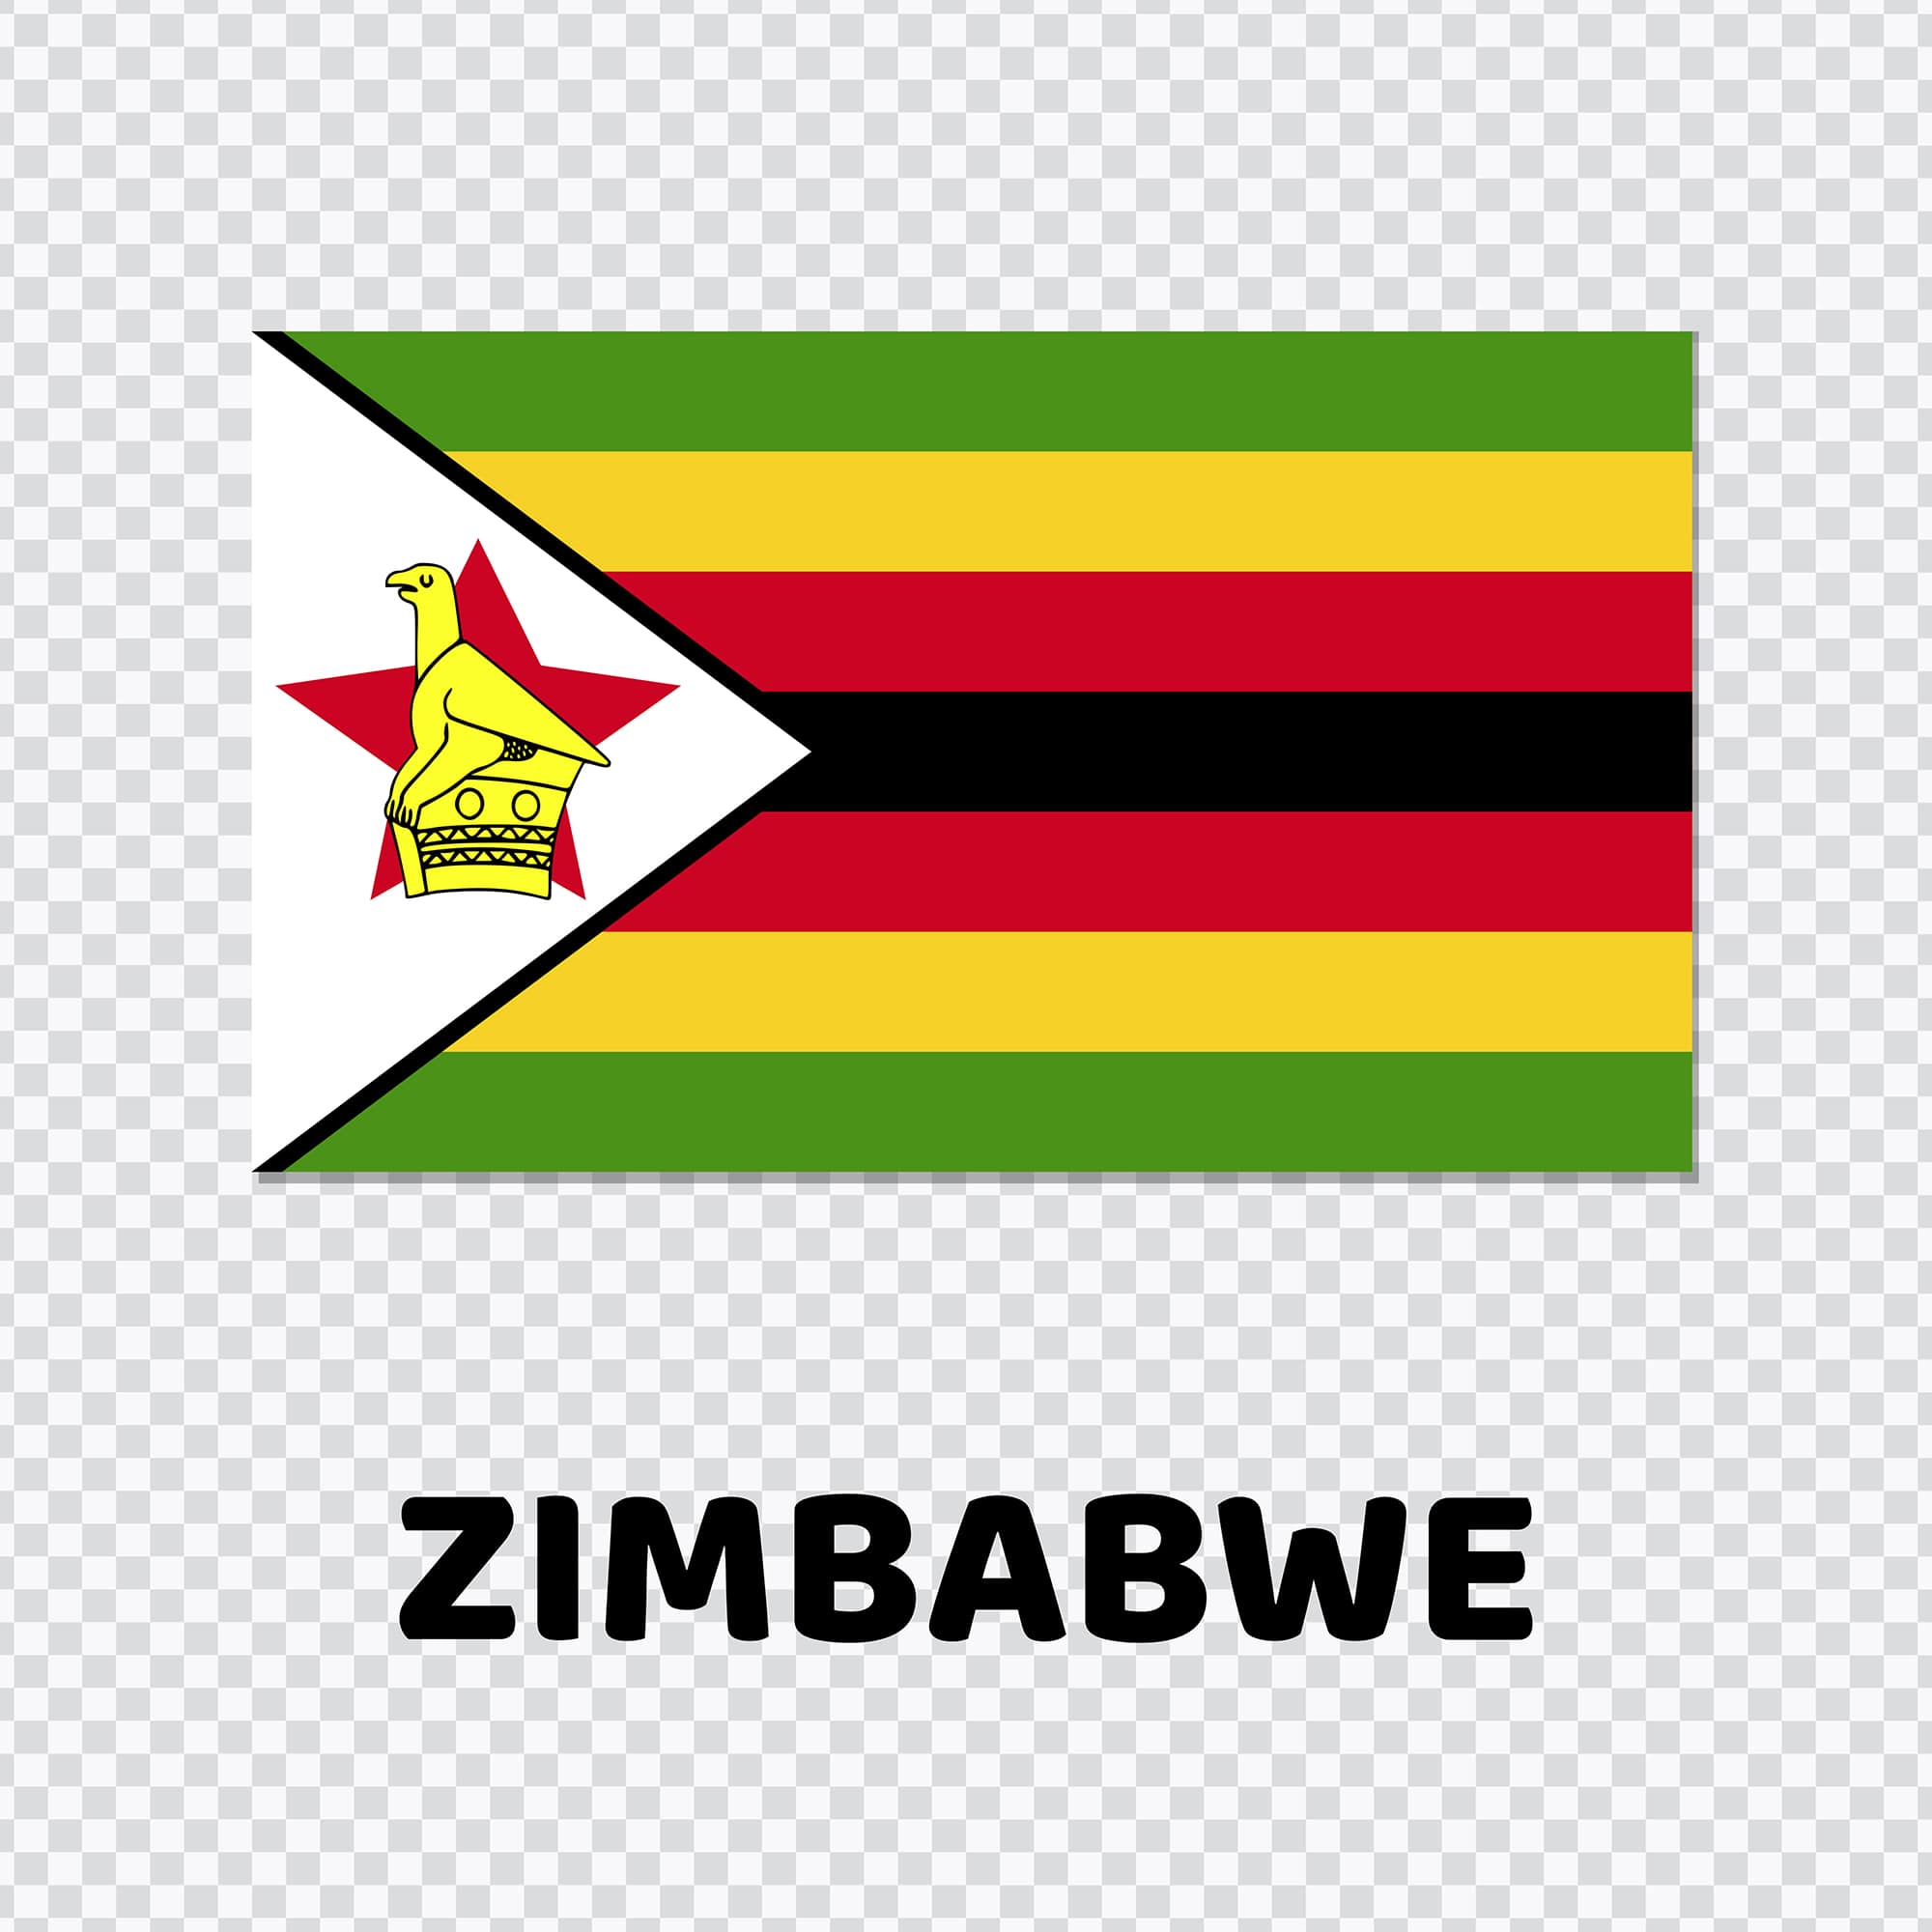 Zimbabwe Country flag vector graphics for free download in ai, eps10 and svg format